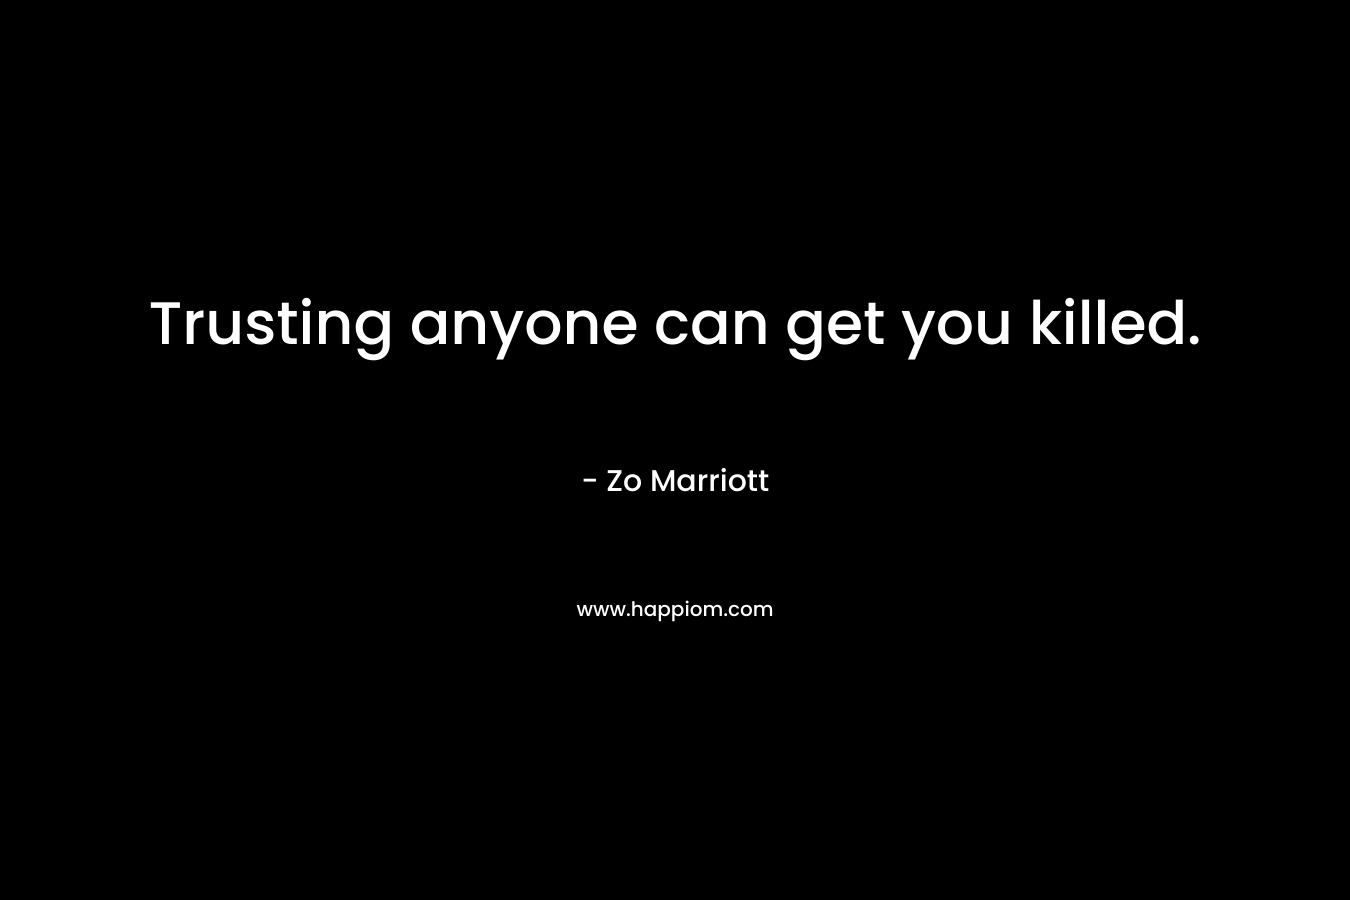 Trusting anyone can get you killed.